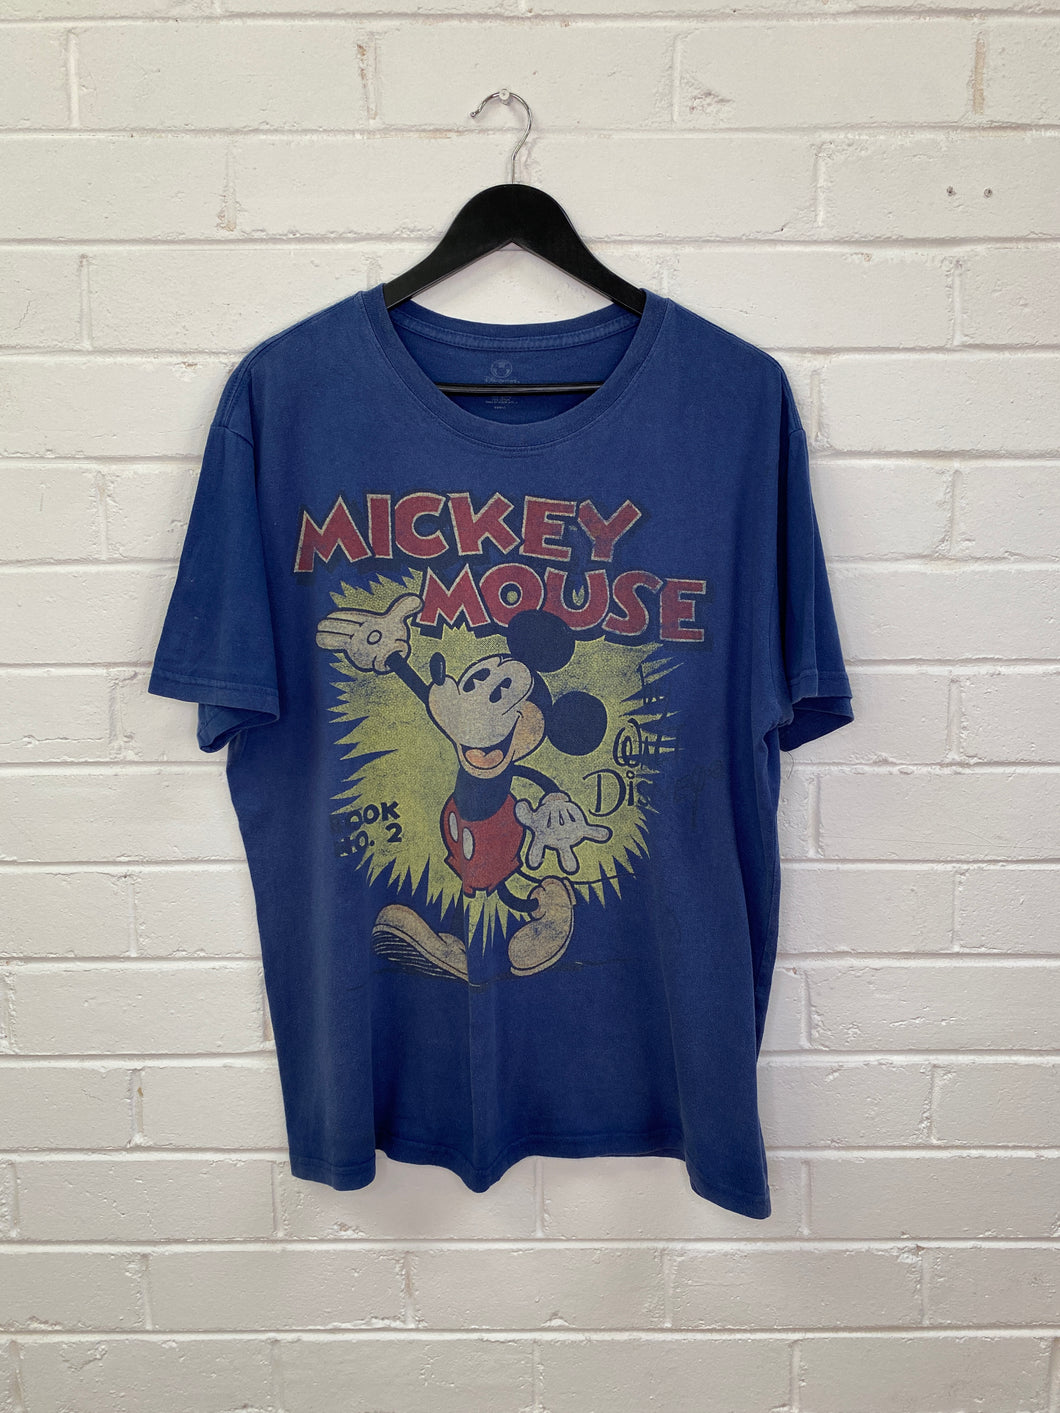 Pre-Loved Mickey Mouse Tee